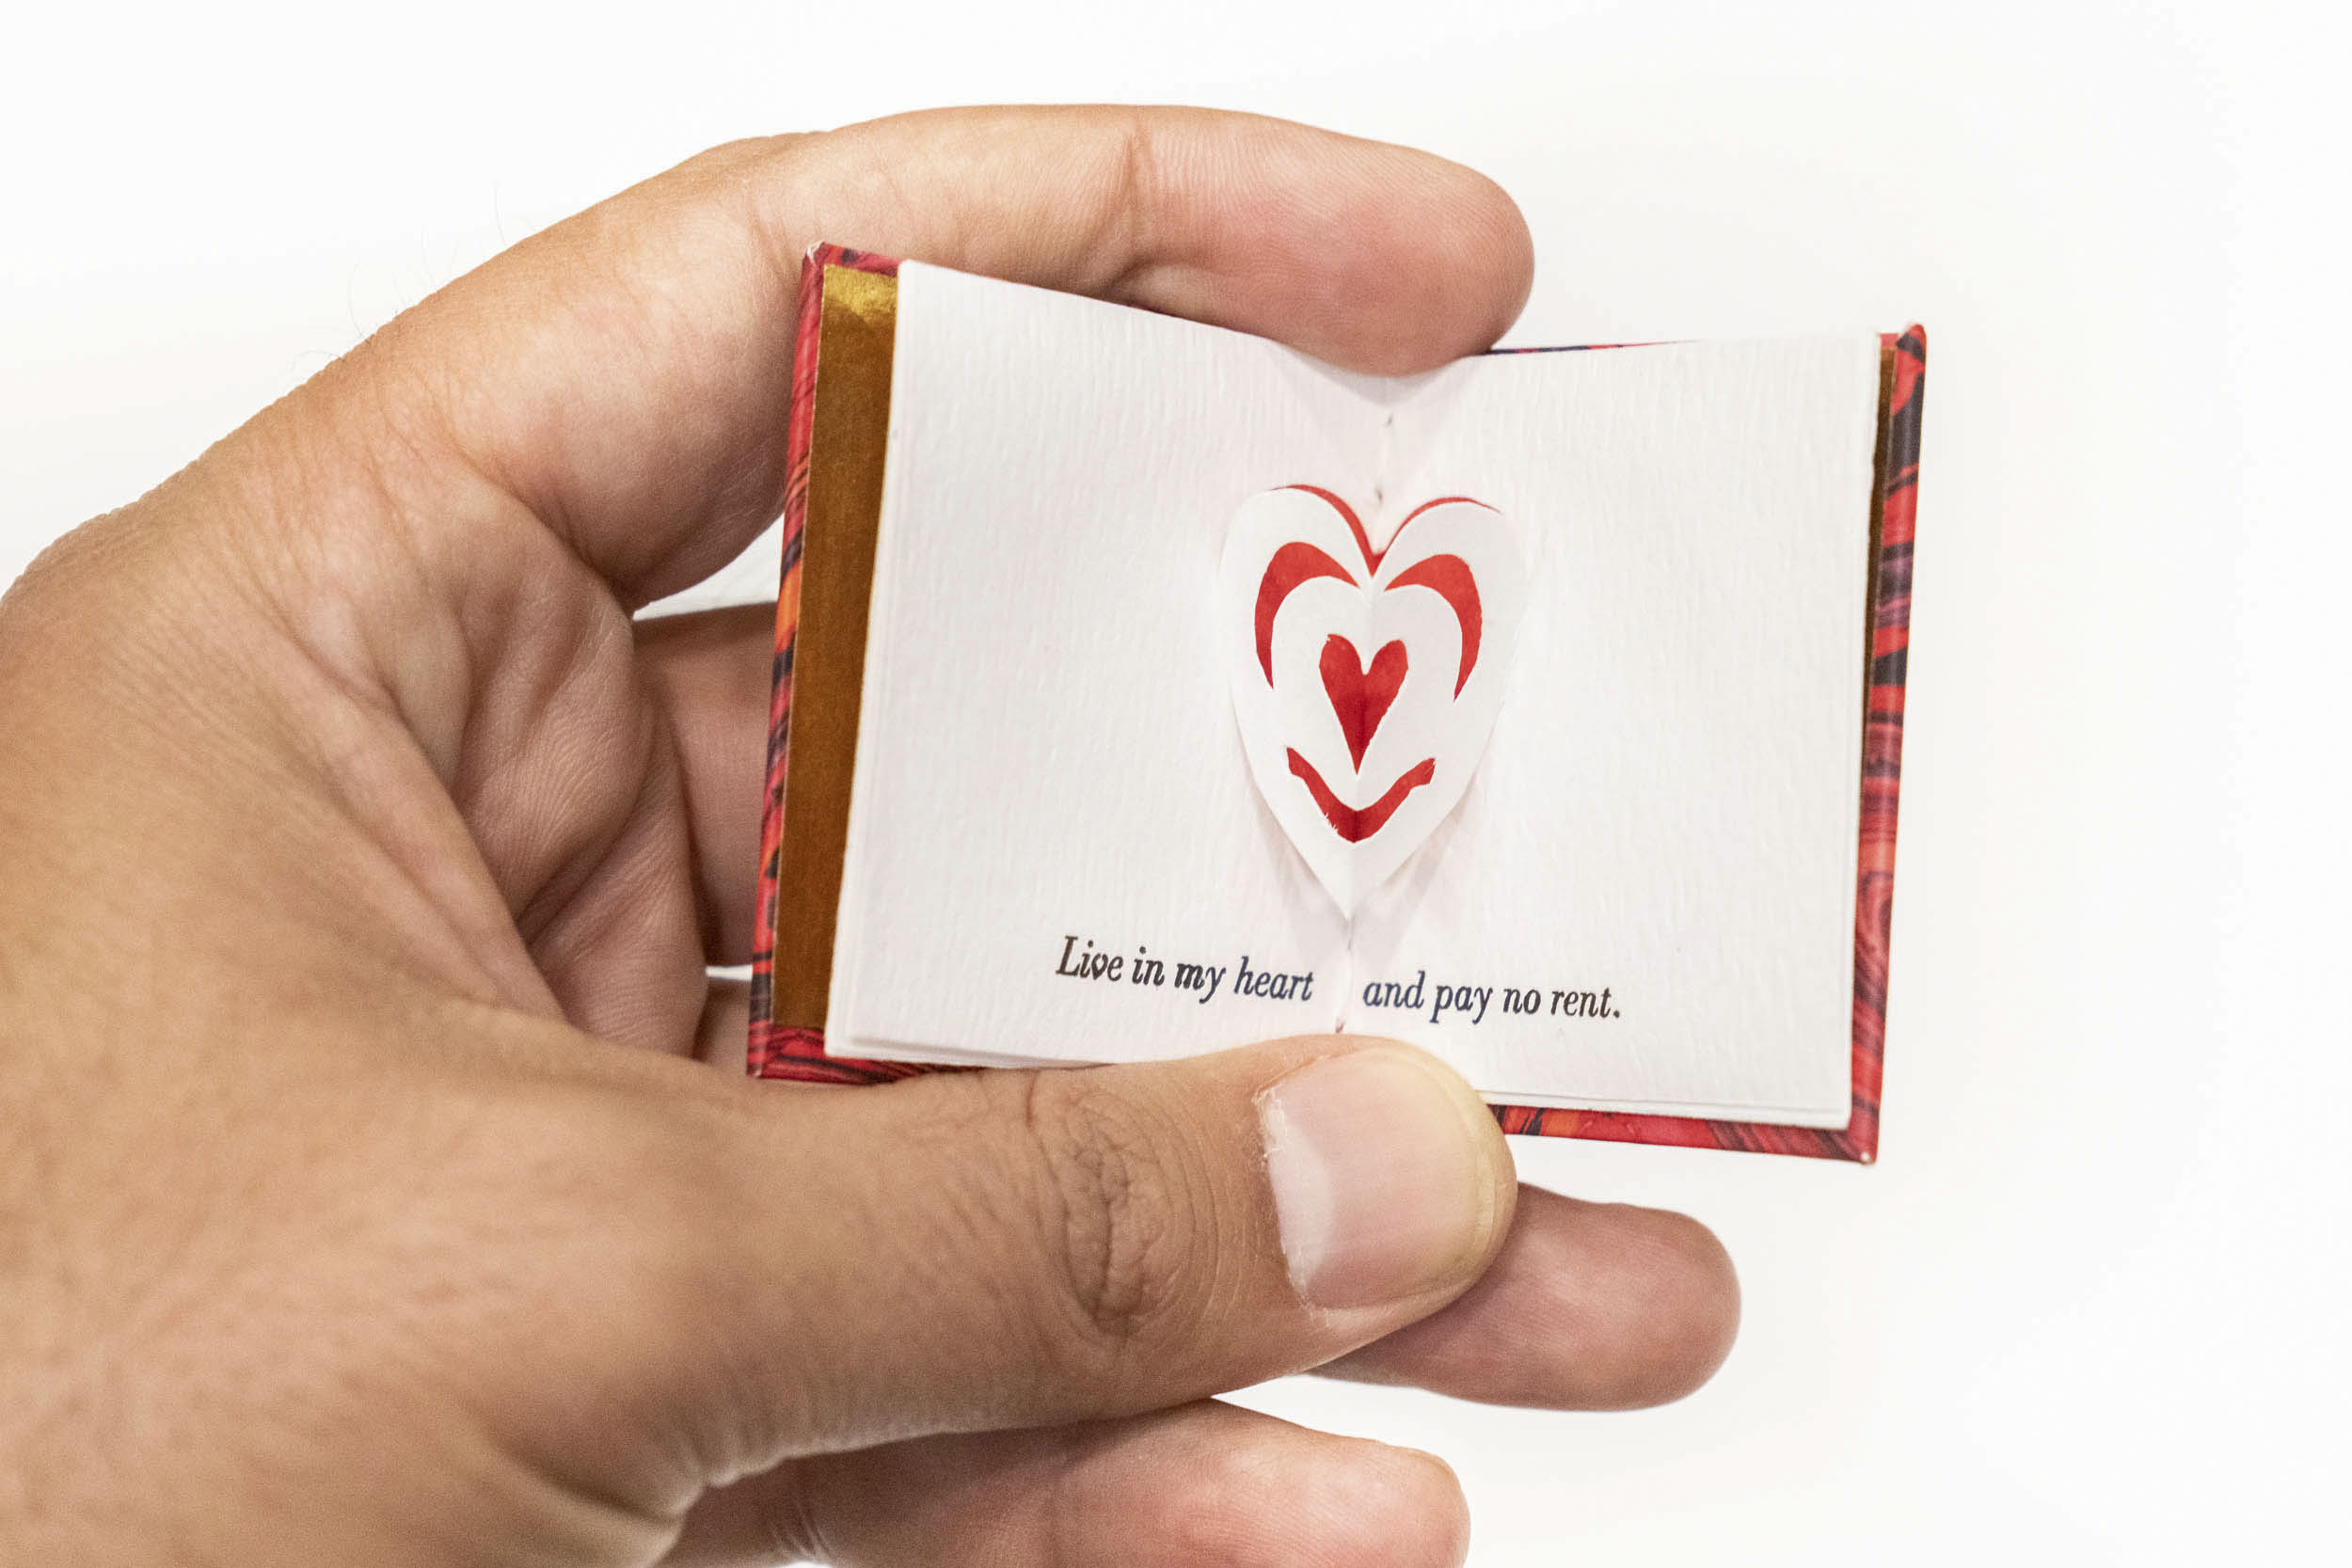 This miniature book, titled “A Valentine,” was made by Jeanne Goessling and is part of the library’s McGehee Miniature Book Collection (for more about that collection, see the link in the first paragraph).